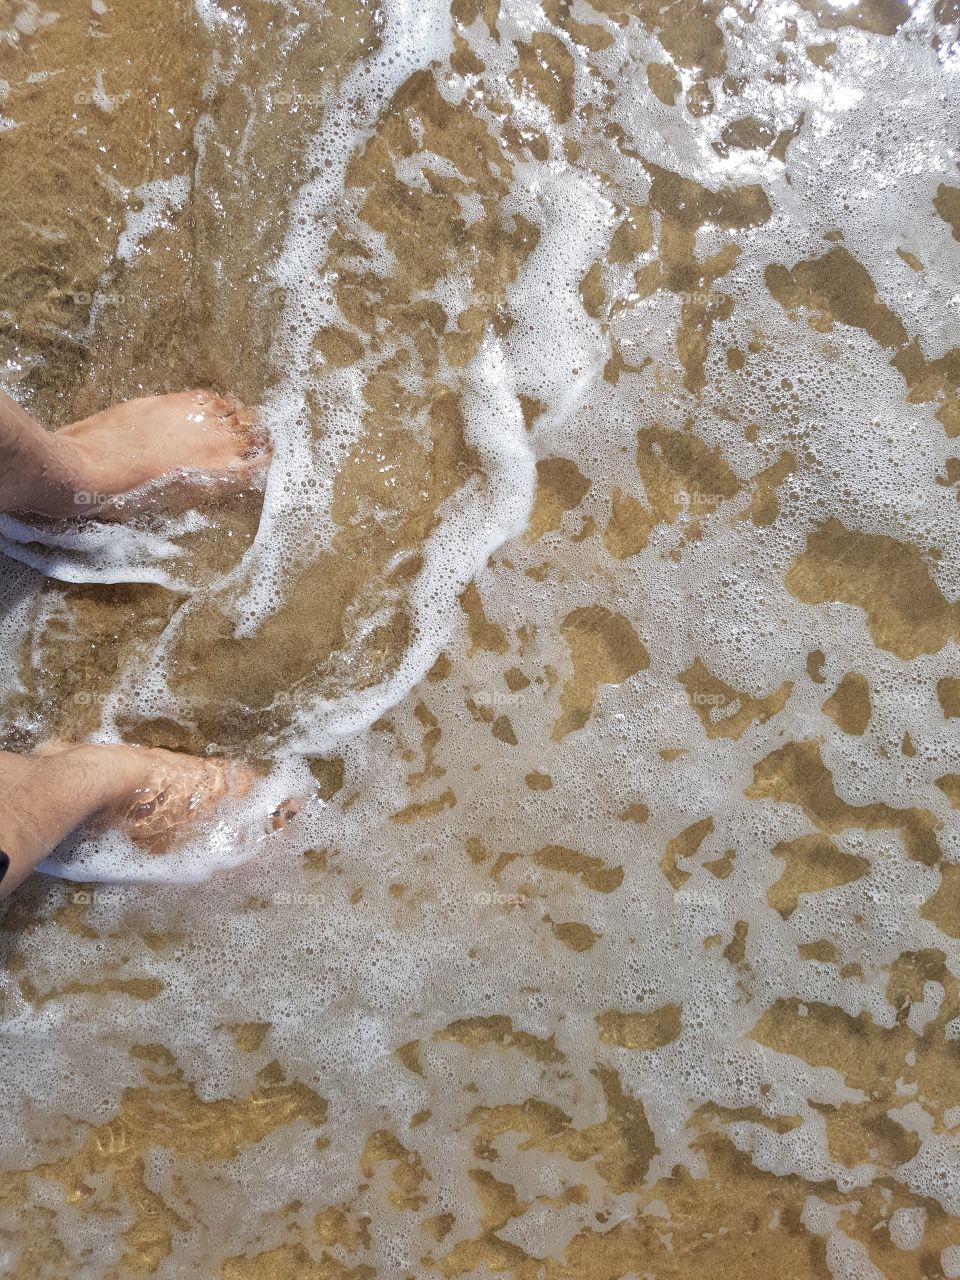 The feet in water